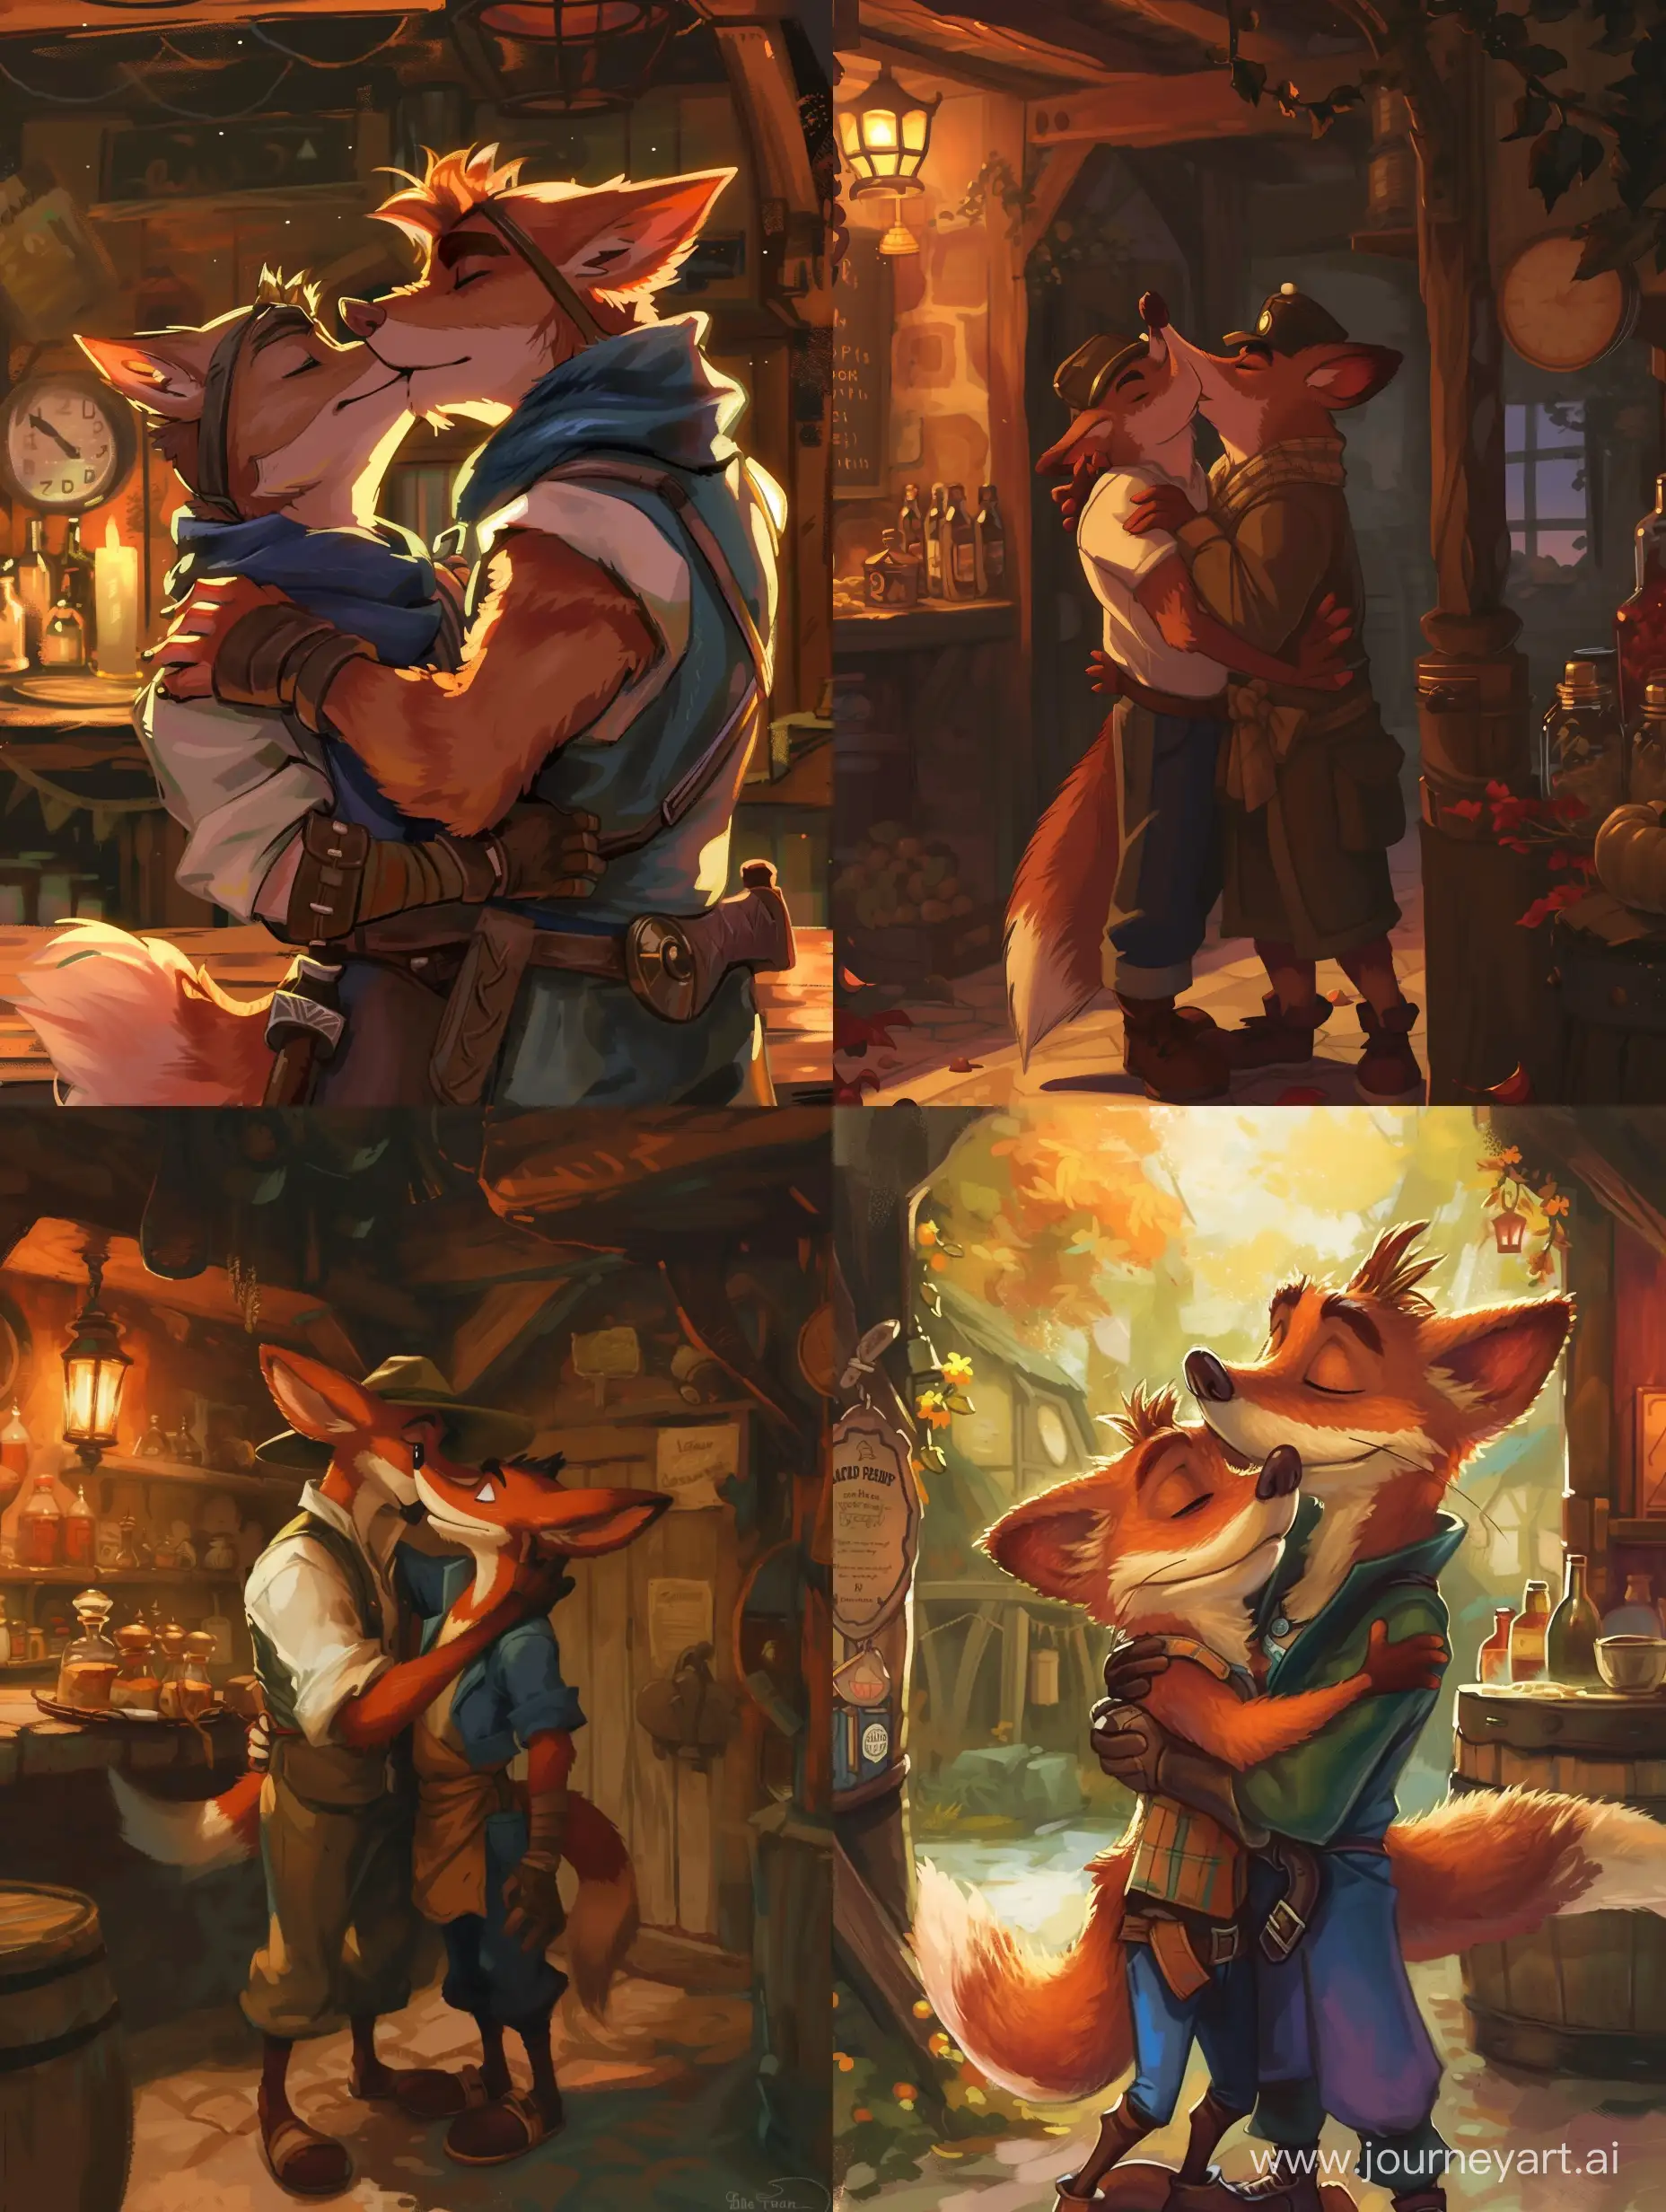 Adorable-Anime-Furry-Coco-Bandicoot-Sharing-a-Sweet-Kiss-with-Bandicoot-Guy-Near-Tavern